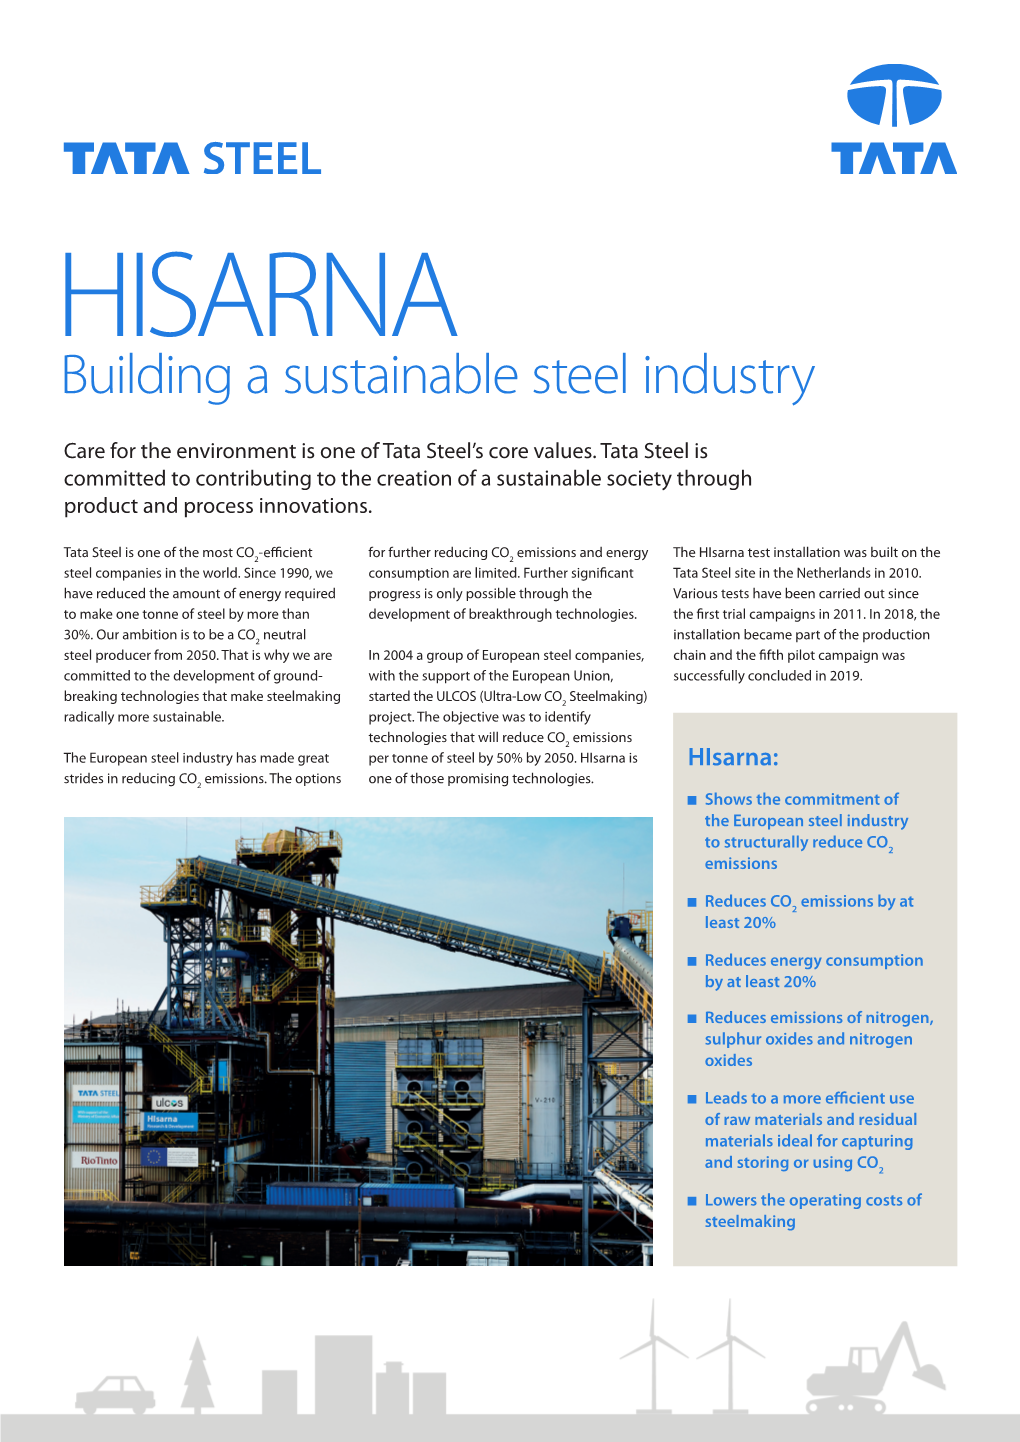 Building a Sustainable Steel Industry